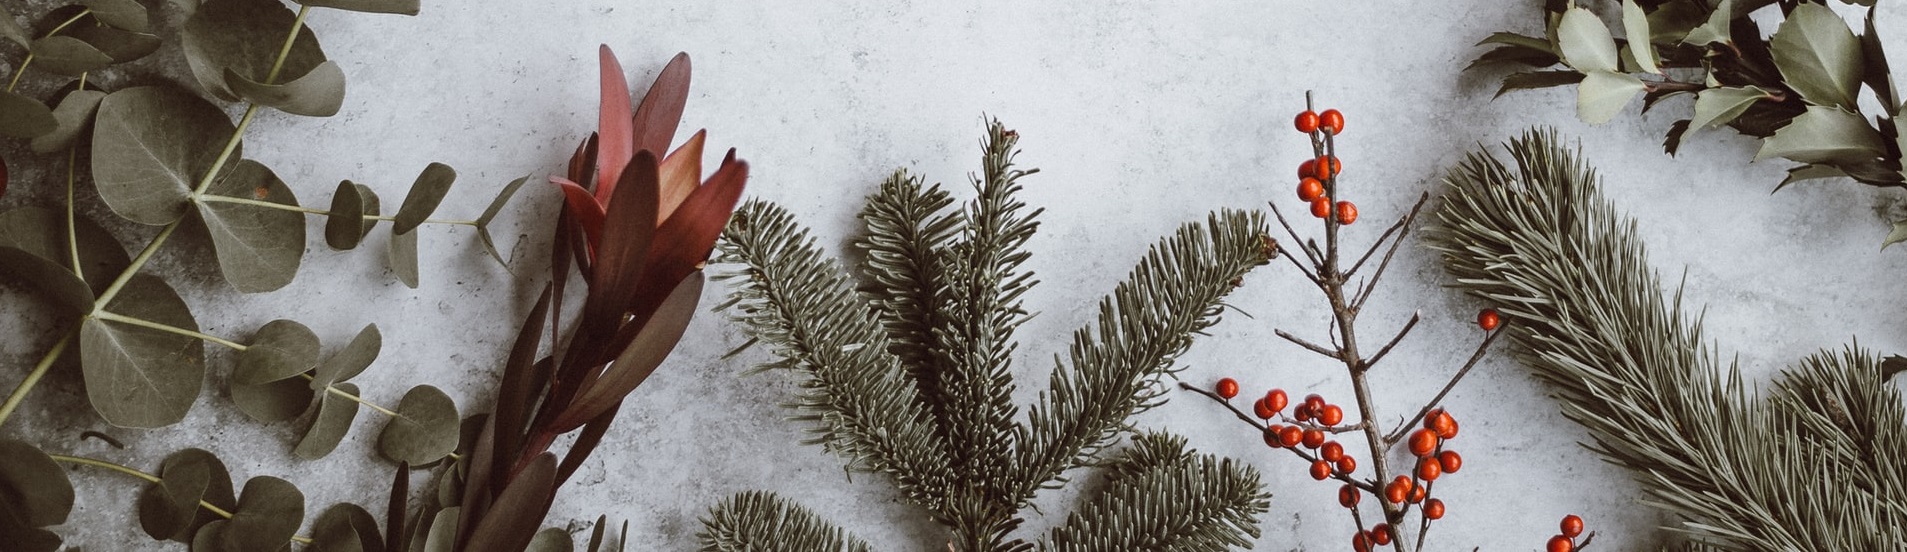 plants associated with Christmas on a tabletop 